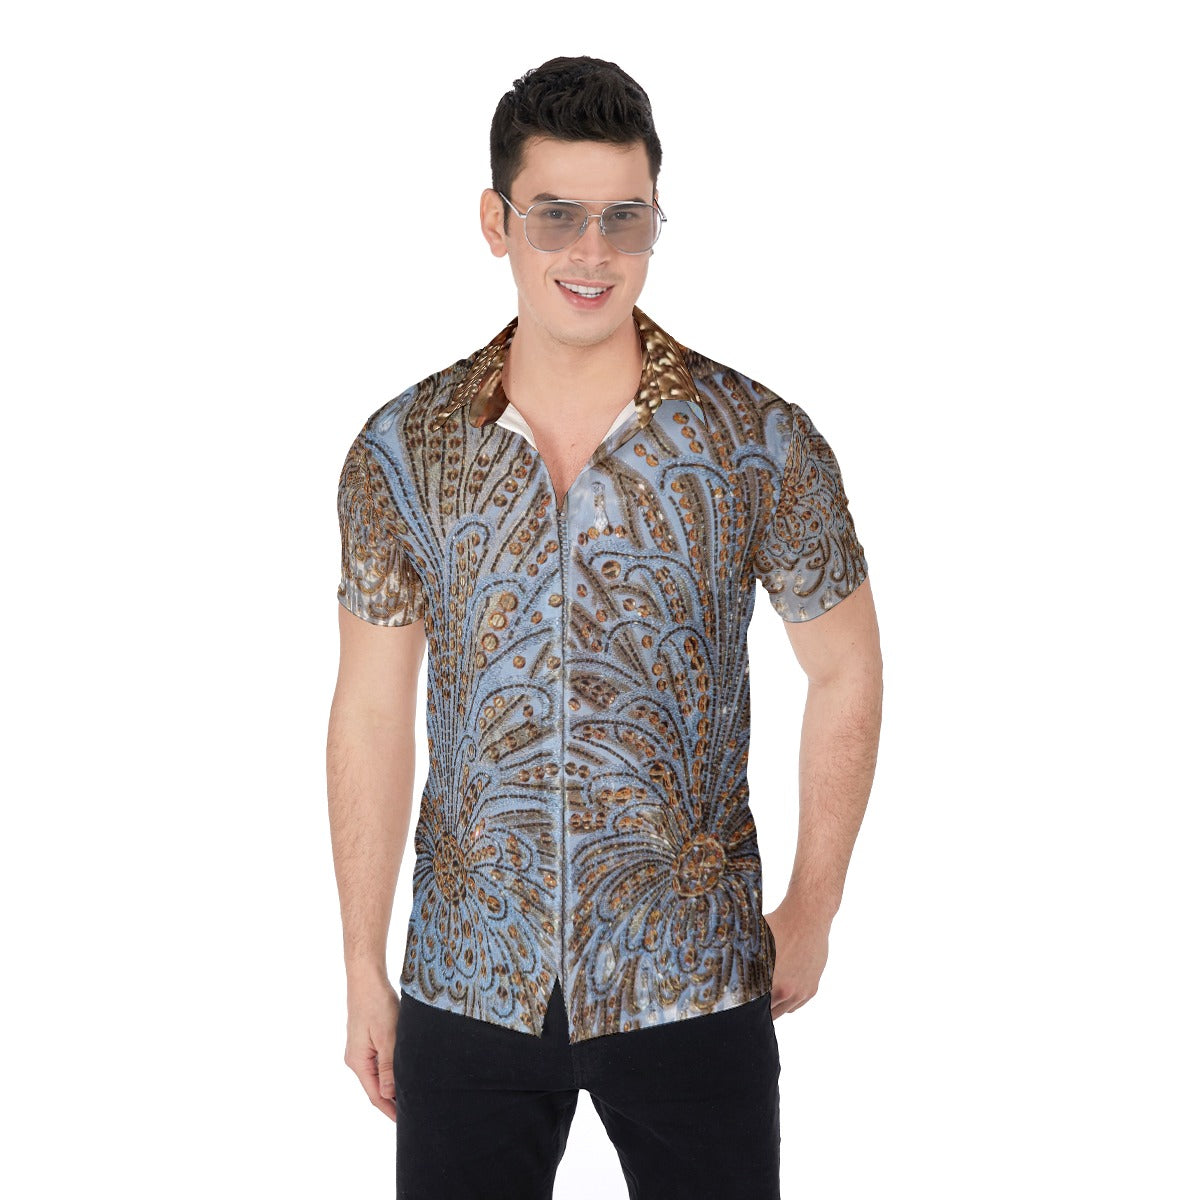 Liberace Costume Print Shirt, printed from a photo of a Liberace ...